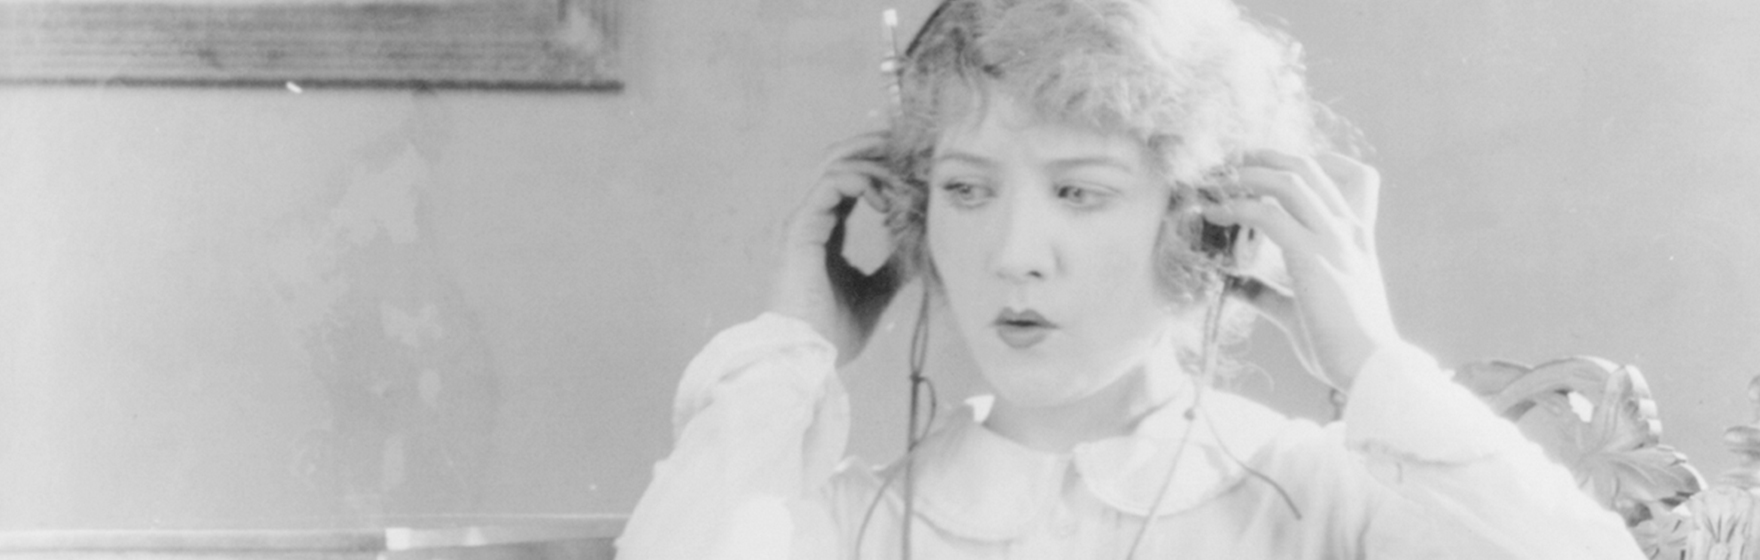 historic photograph shows women sitting next to radio listening to radio broadcast by holding headphones to ears.